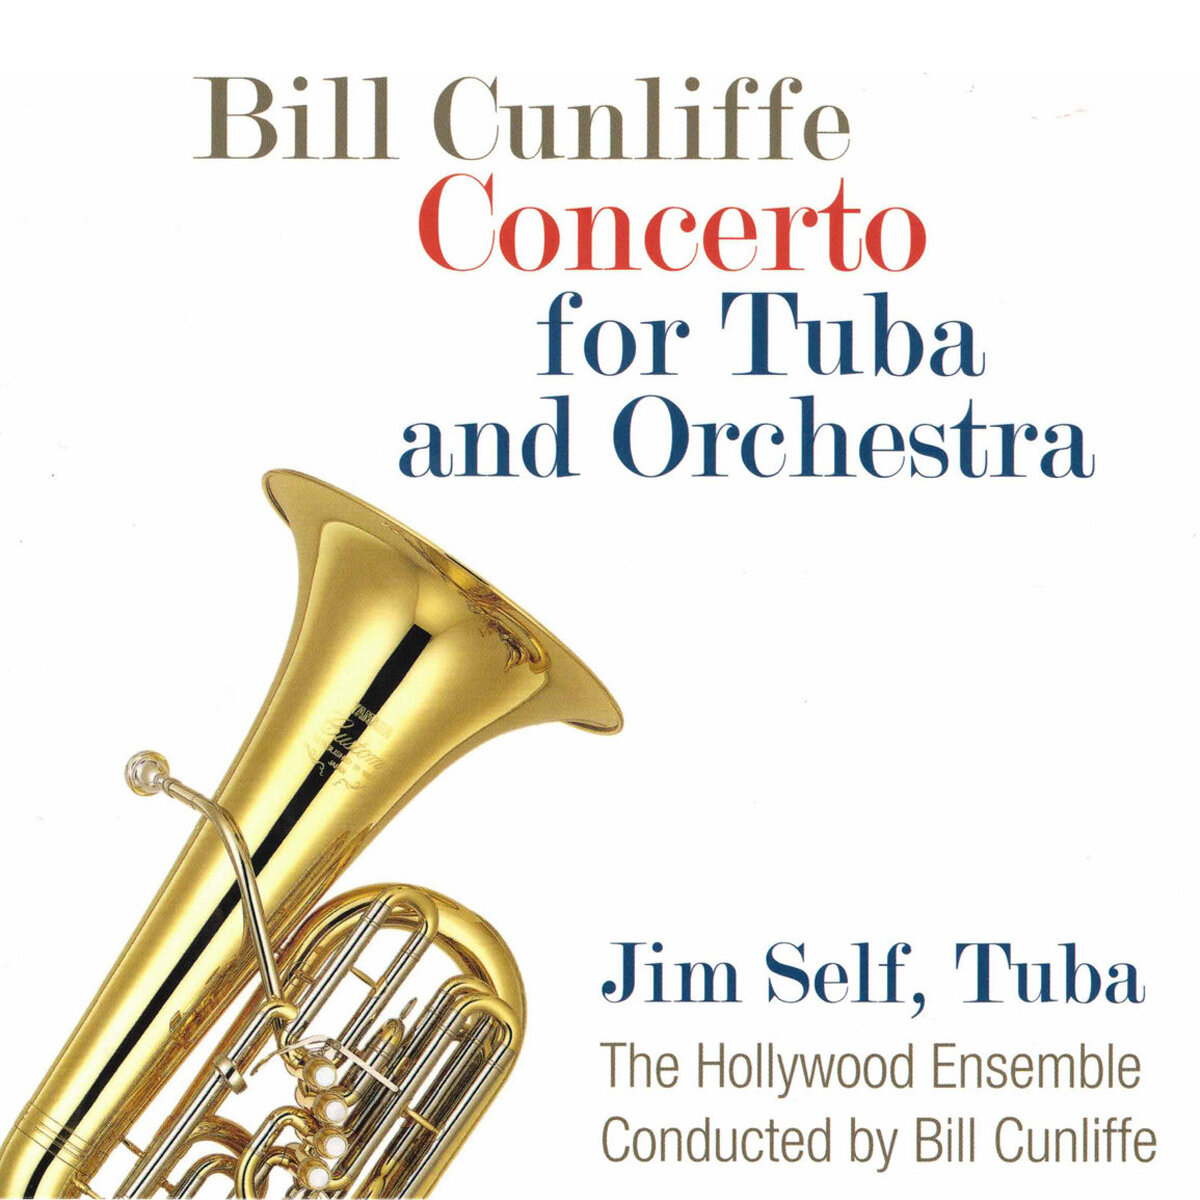 concerto-for-tuba-and-orchestra-bill-cunliffe-jim-self-2012-01.jpg